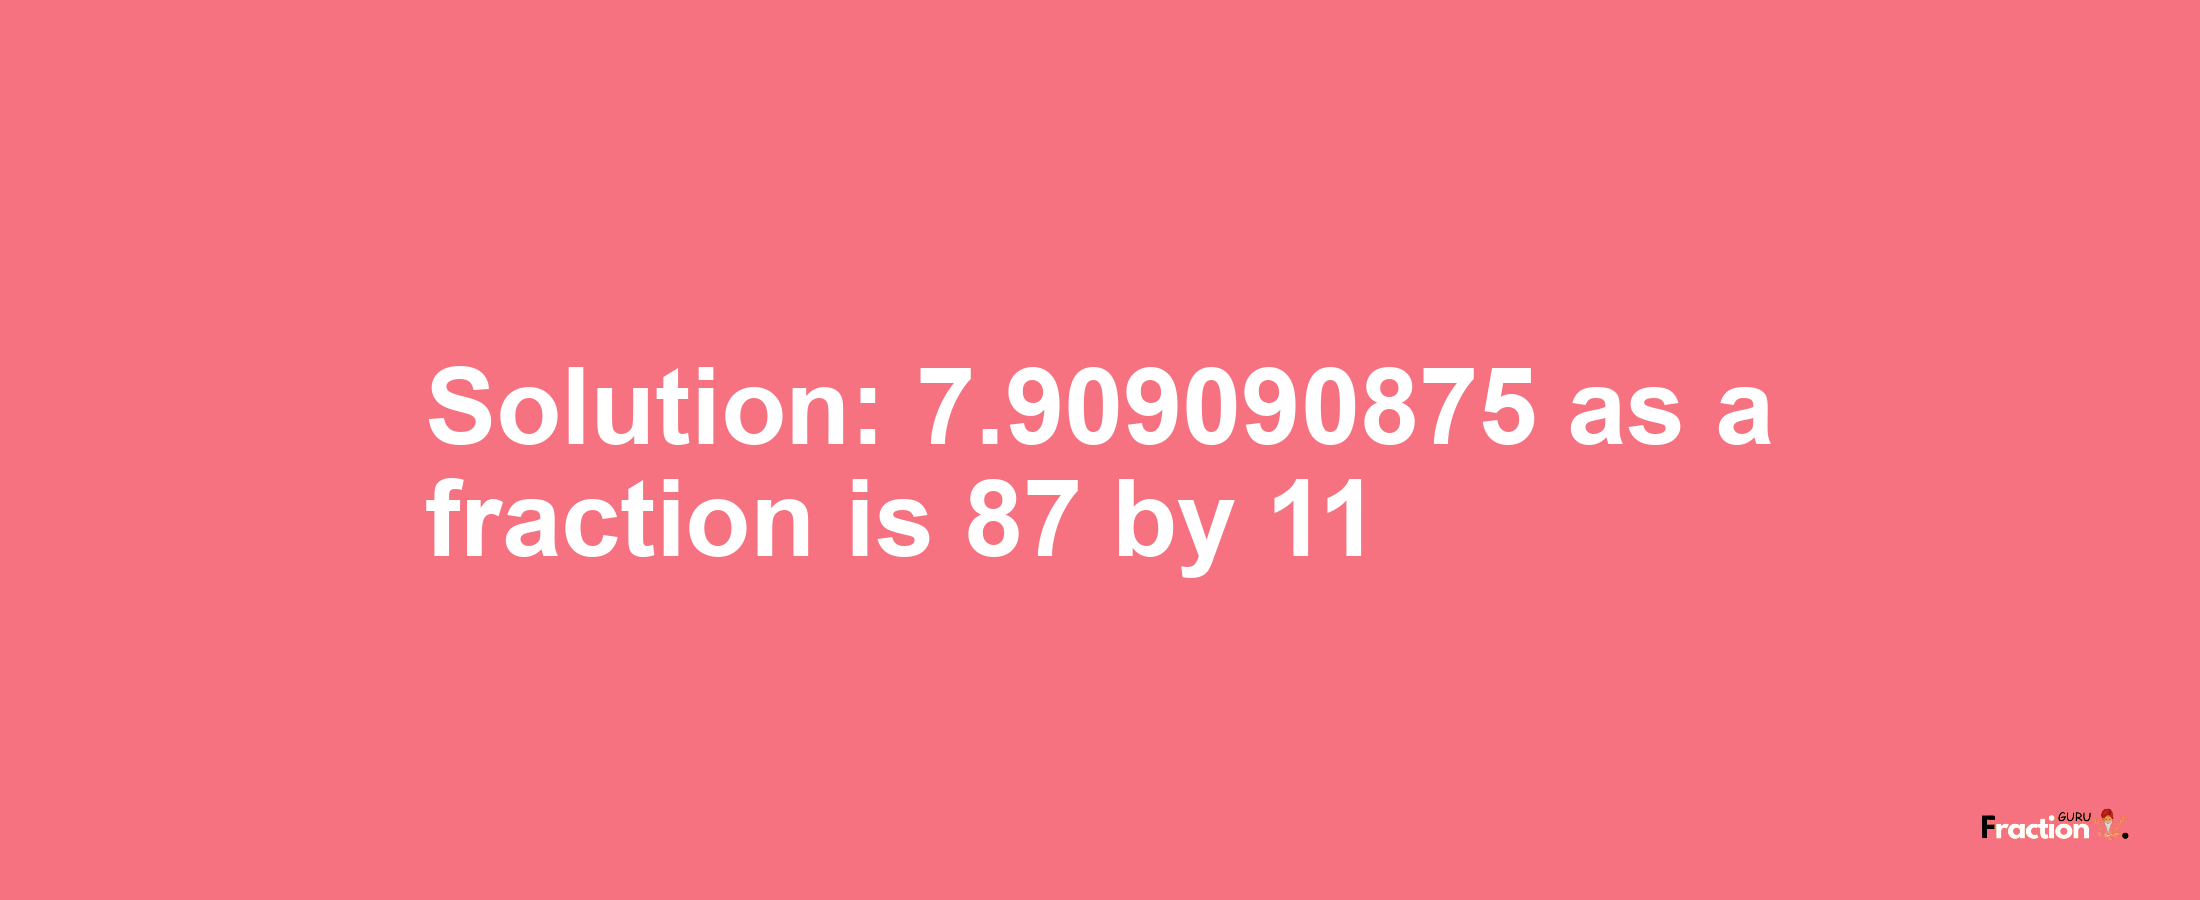 Solution:7.909090875 as a fraction is 87/11